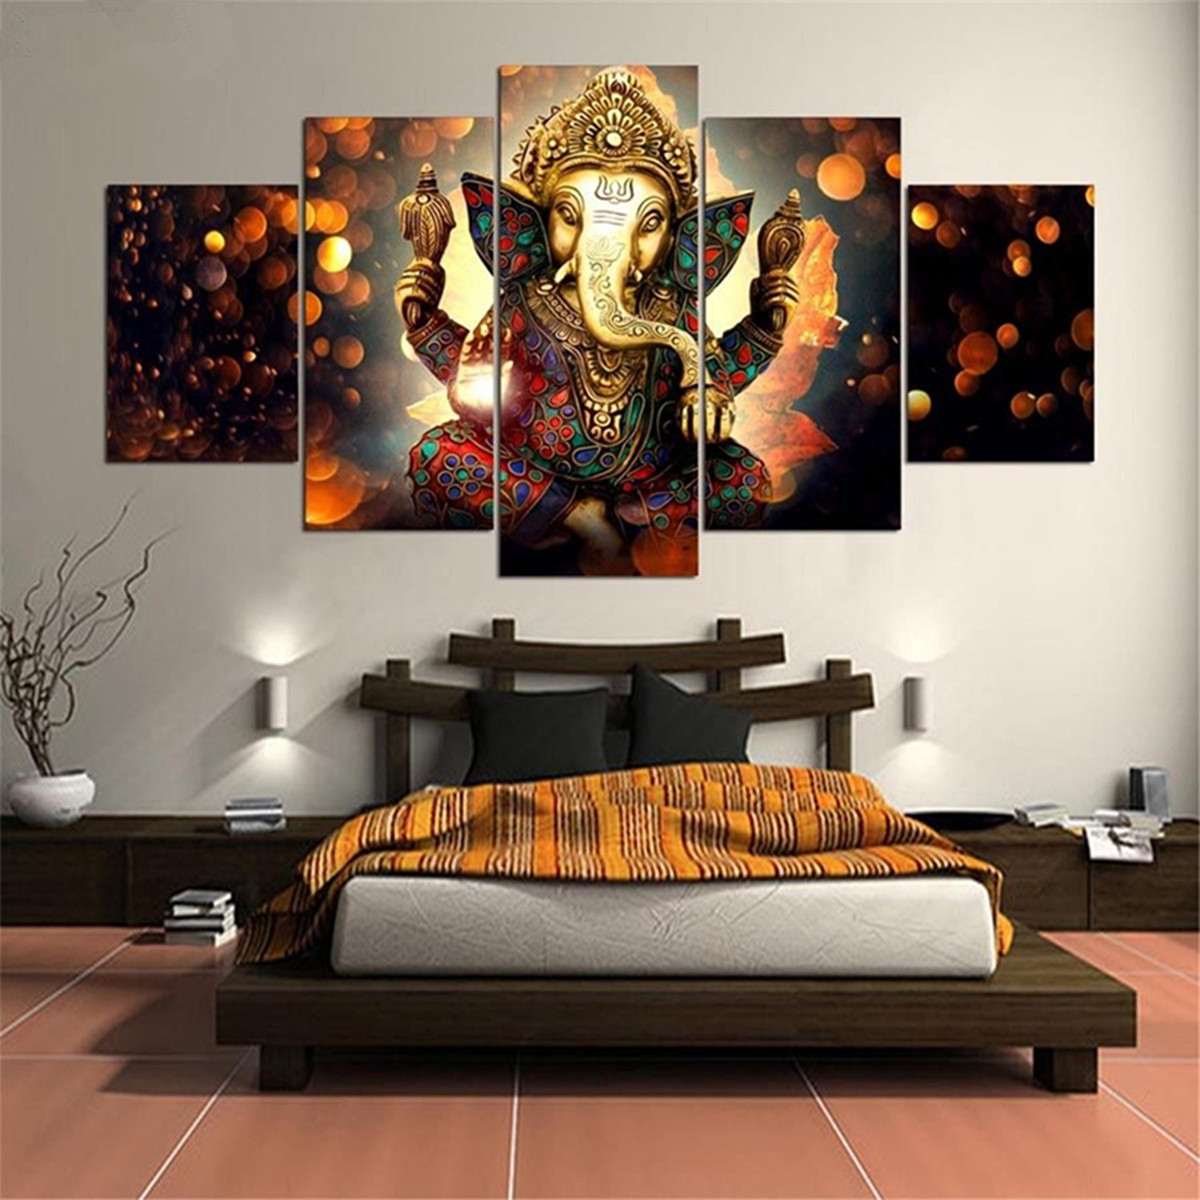 5-Pcs-Canvas-Ganesha-Painting-Indian-Style-FramedFrameless-Poster-Printing-Wall-Art-Decor-Picture-fo-1208833-4